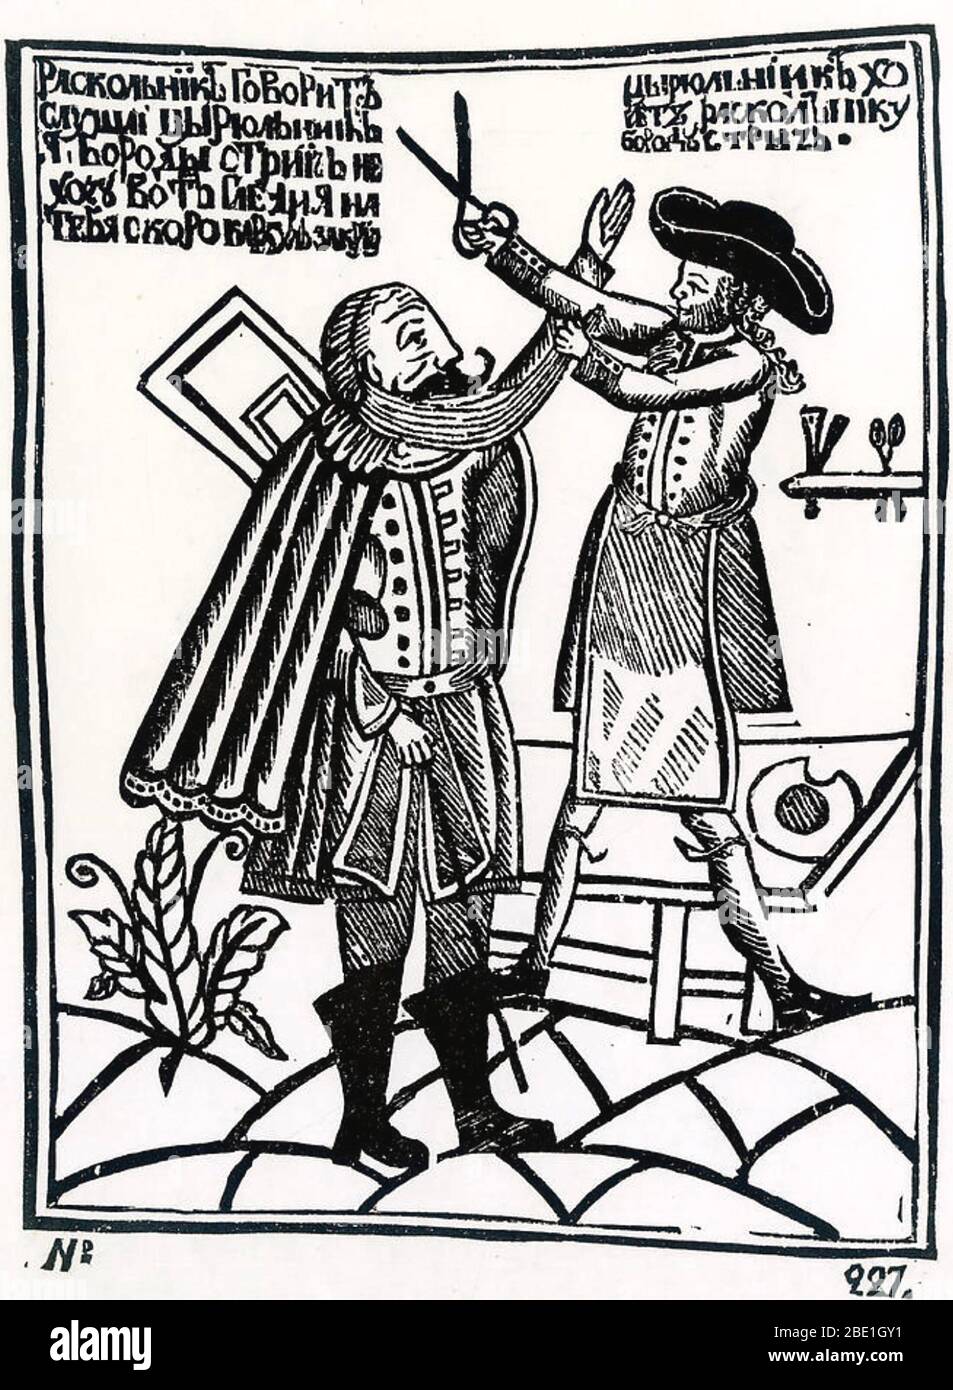 PETER THE GREAT (1672-1725) Tsar of Russia in a contemporary woodcut cartoon showing him cutting off a beard as part of his drive to modernise  Russia. Stock Photo